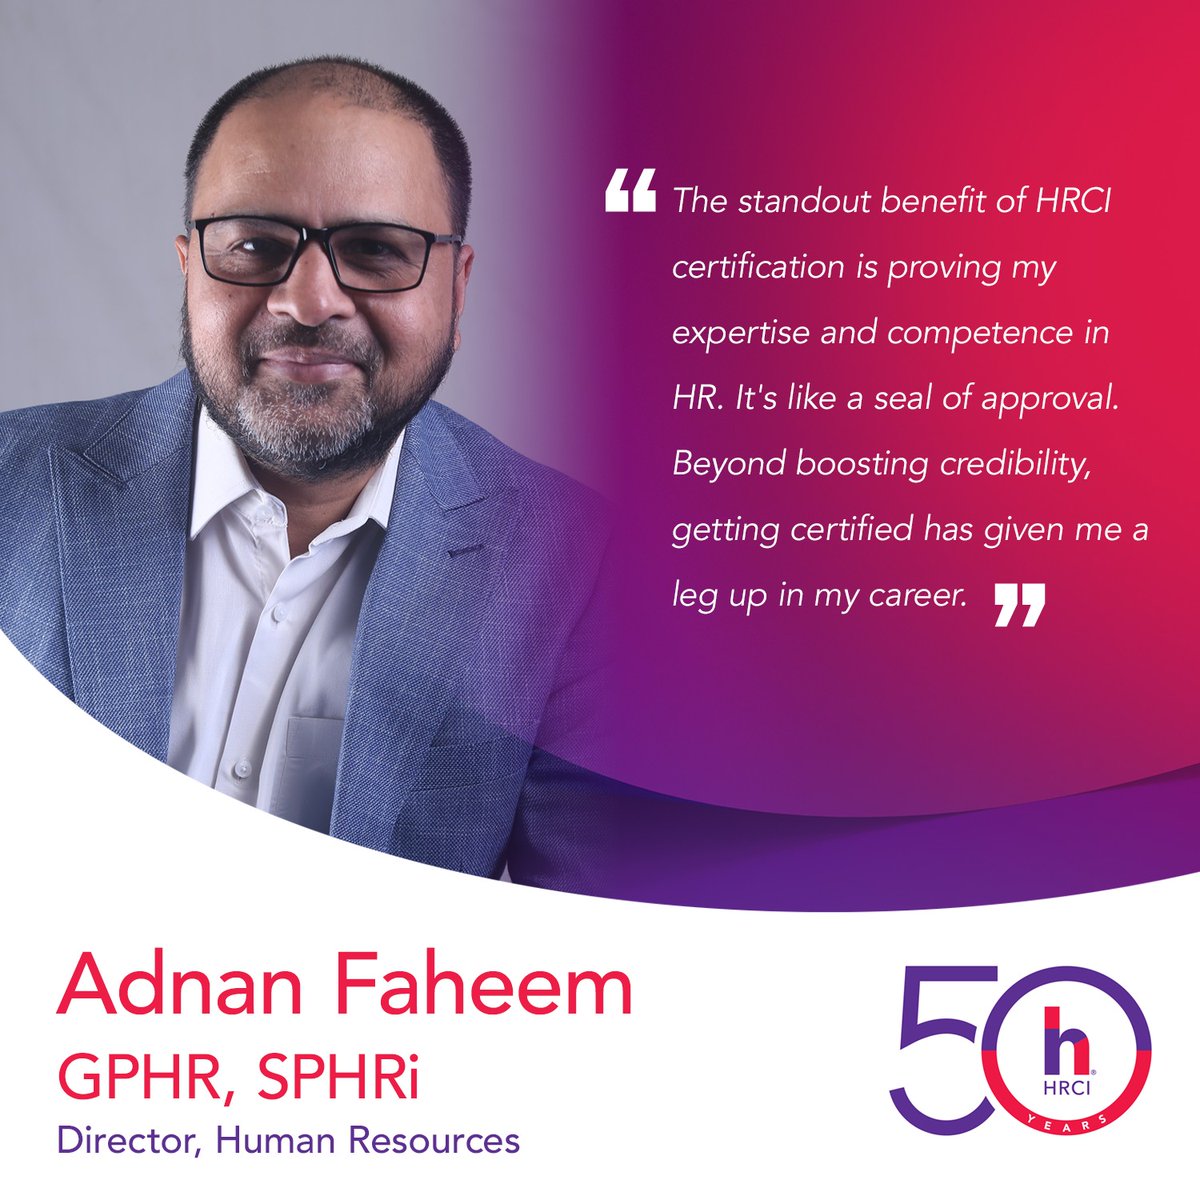 We couldn't agree more, Adnan—HRCI certification is the ultimate seal of approval for HR professionals 🌟. Thank you for sharing your experience and being a valued member of the #HRCI community. #HRCI50 #HRCICommunity #HRCICertifications #HRCertifications #HRCICredentials